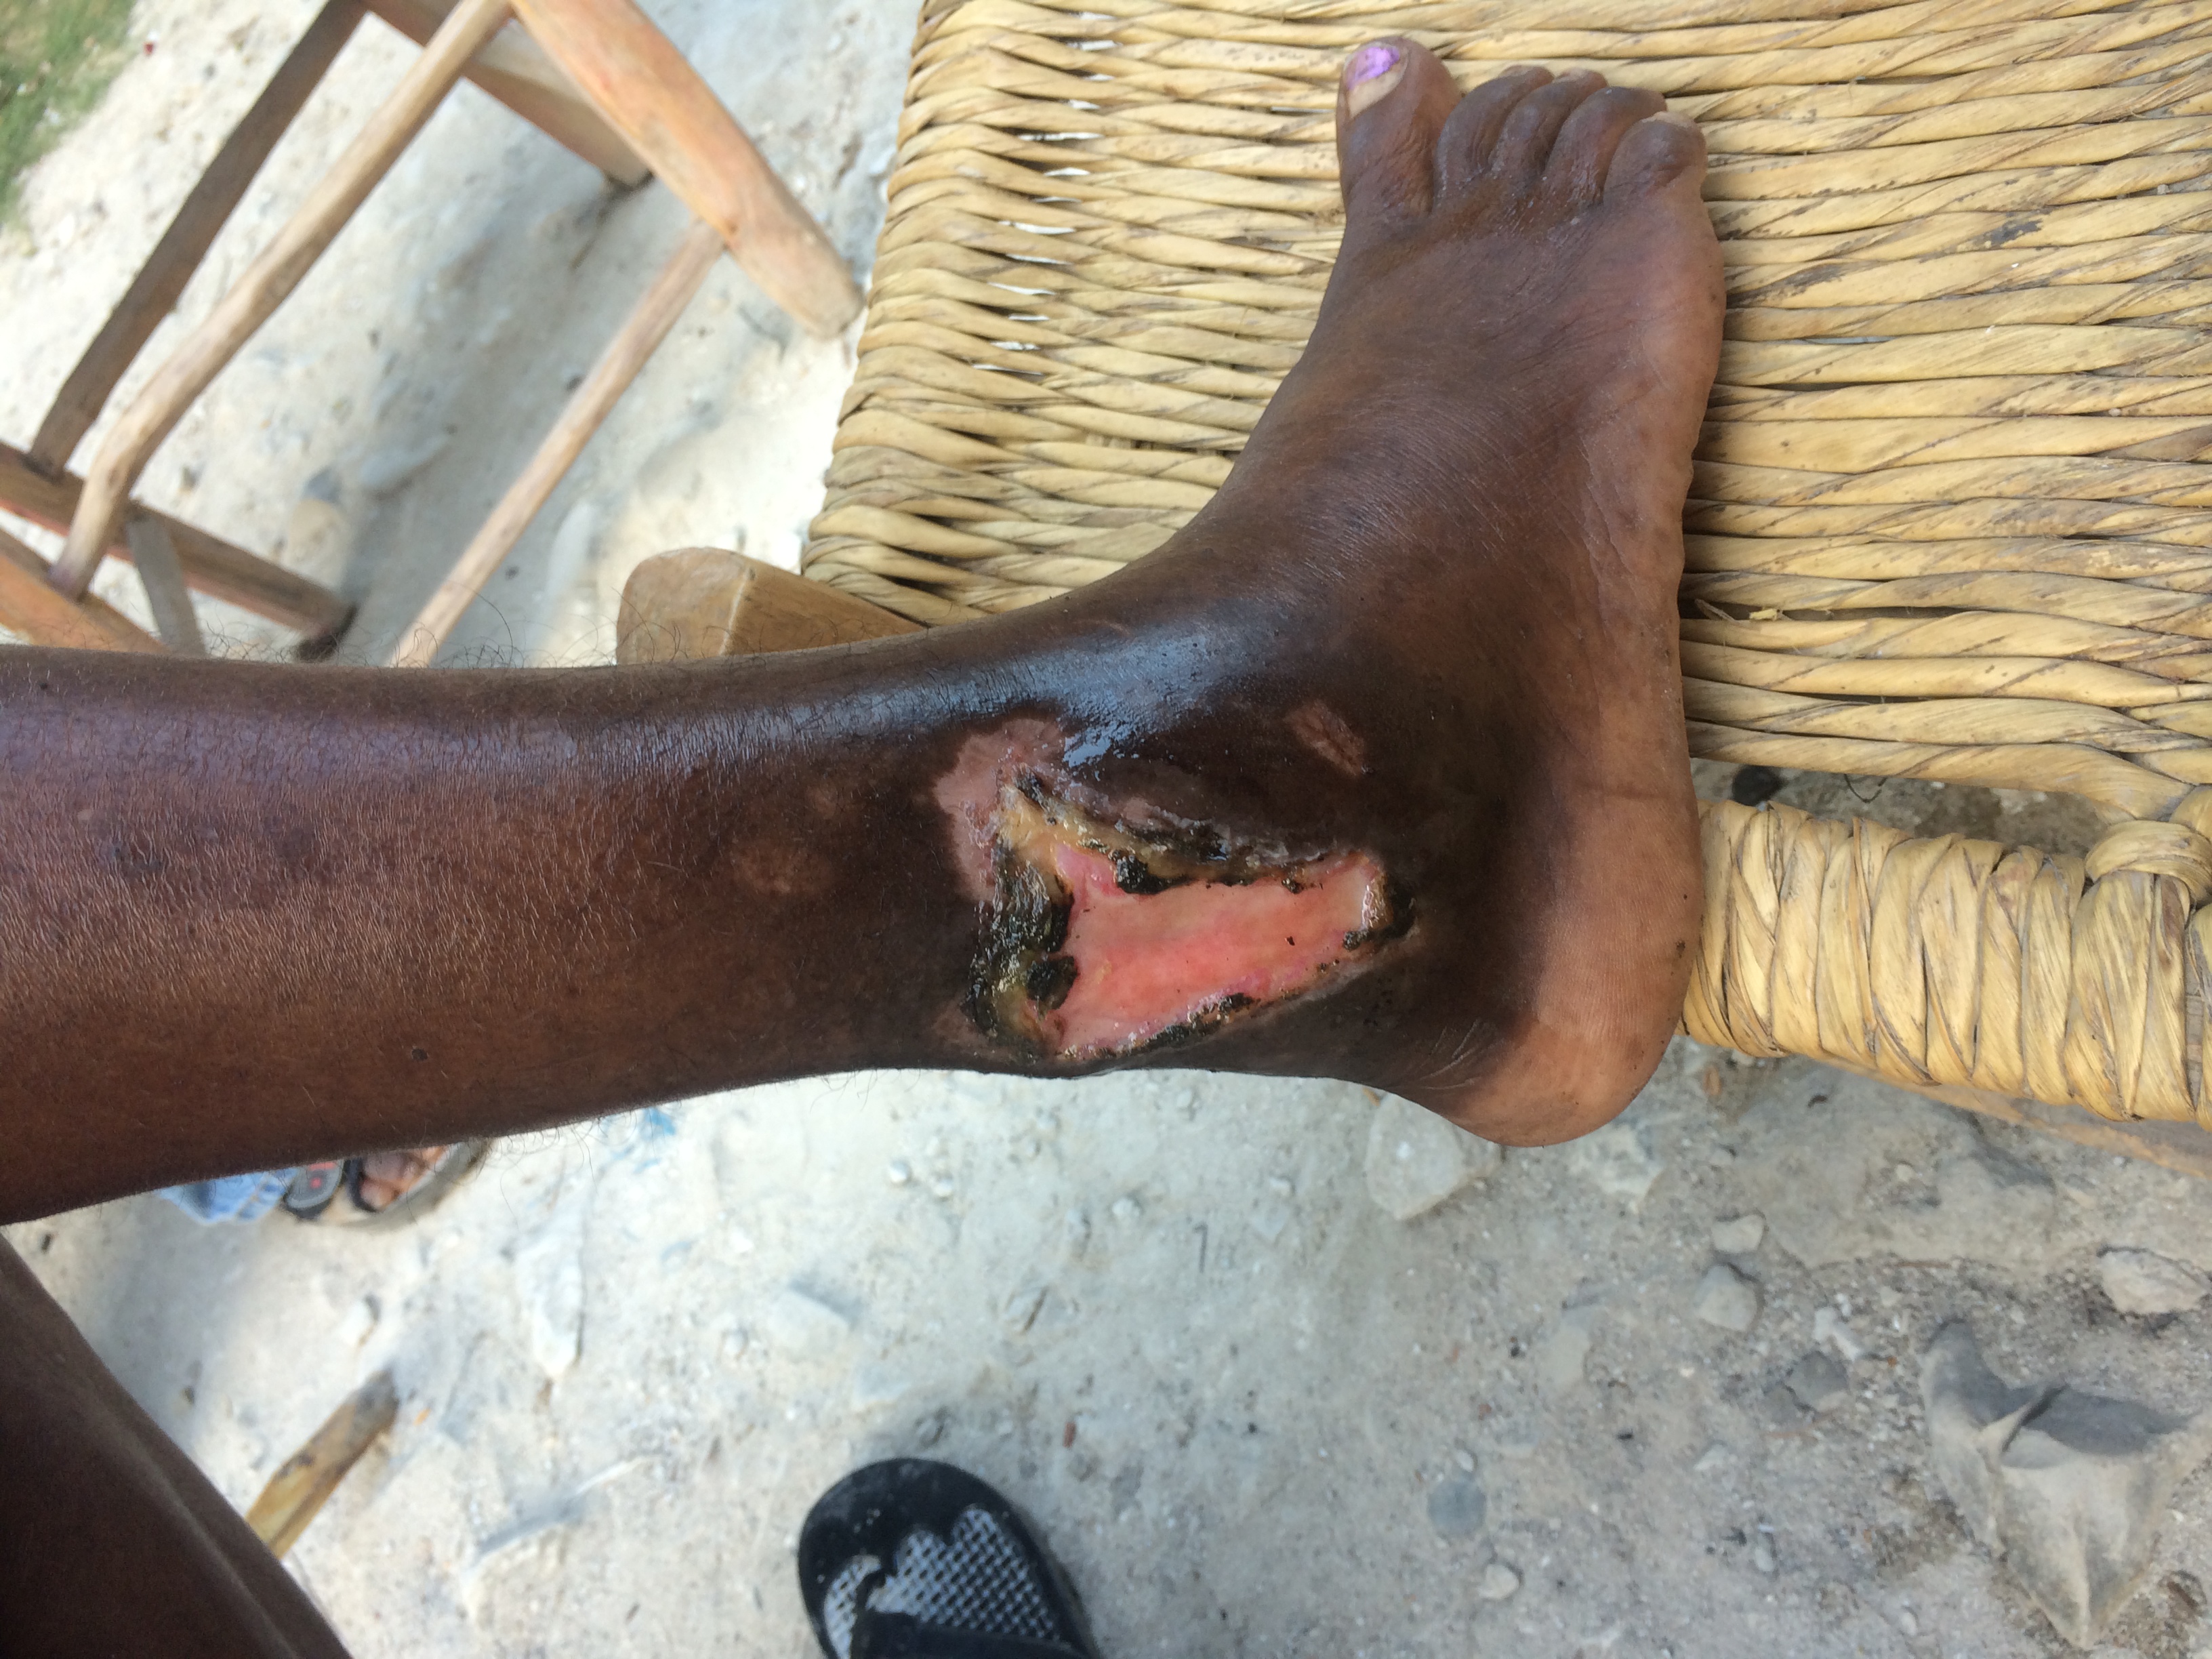 A woman's infected foot after Bill cleaned it up.